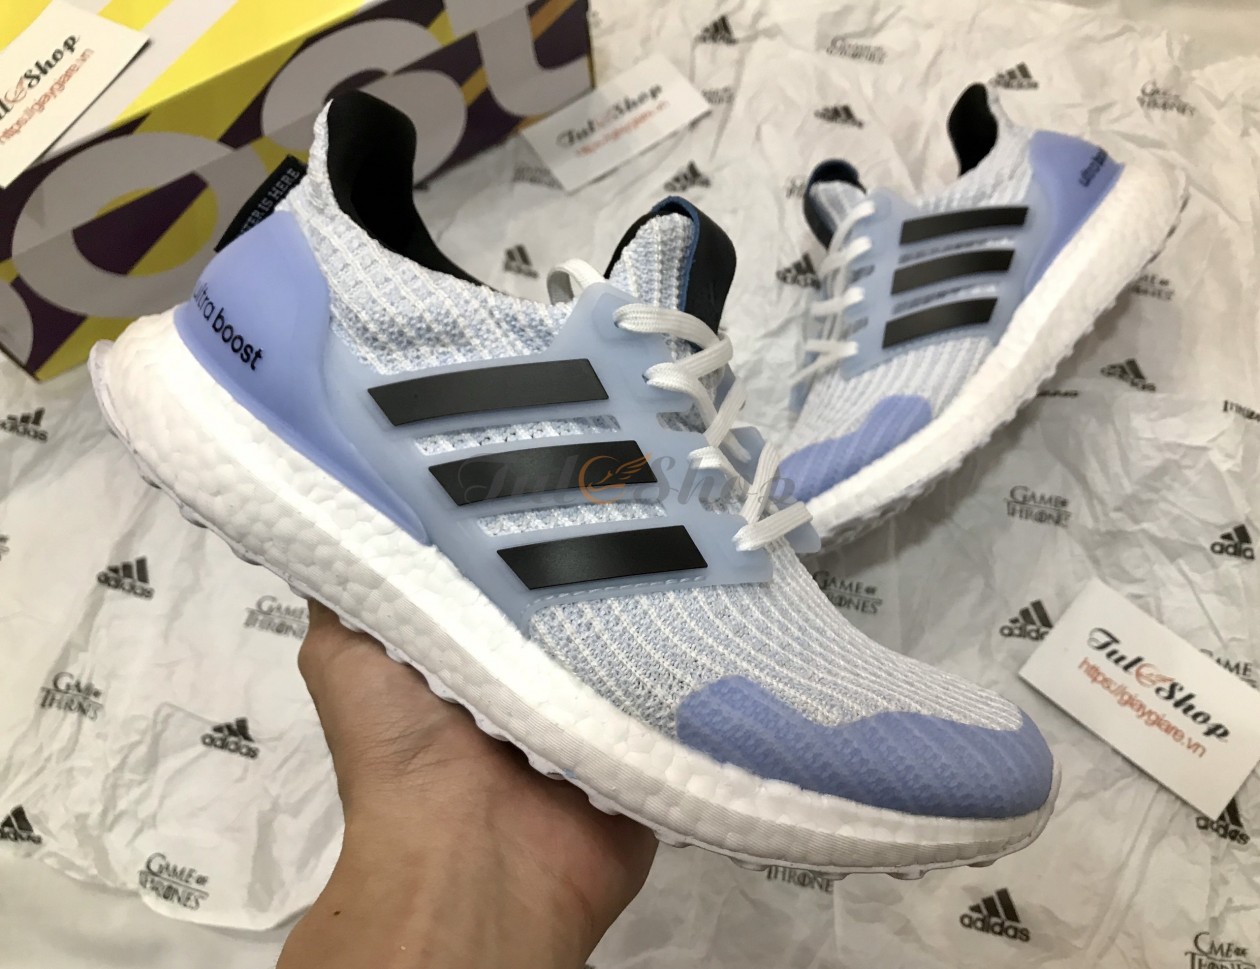 Adidas Ultra Boost 4.0 Game of Thrones 'White Walkers' nam, nữ 1:1